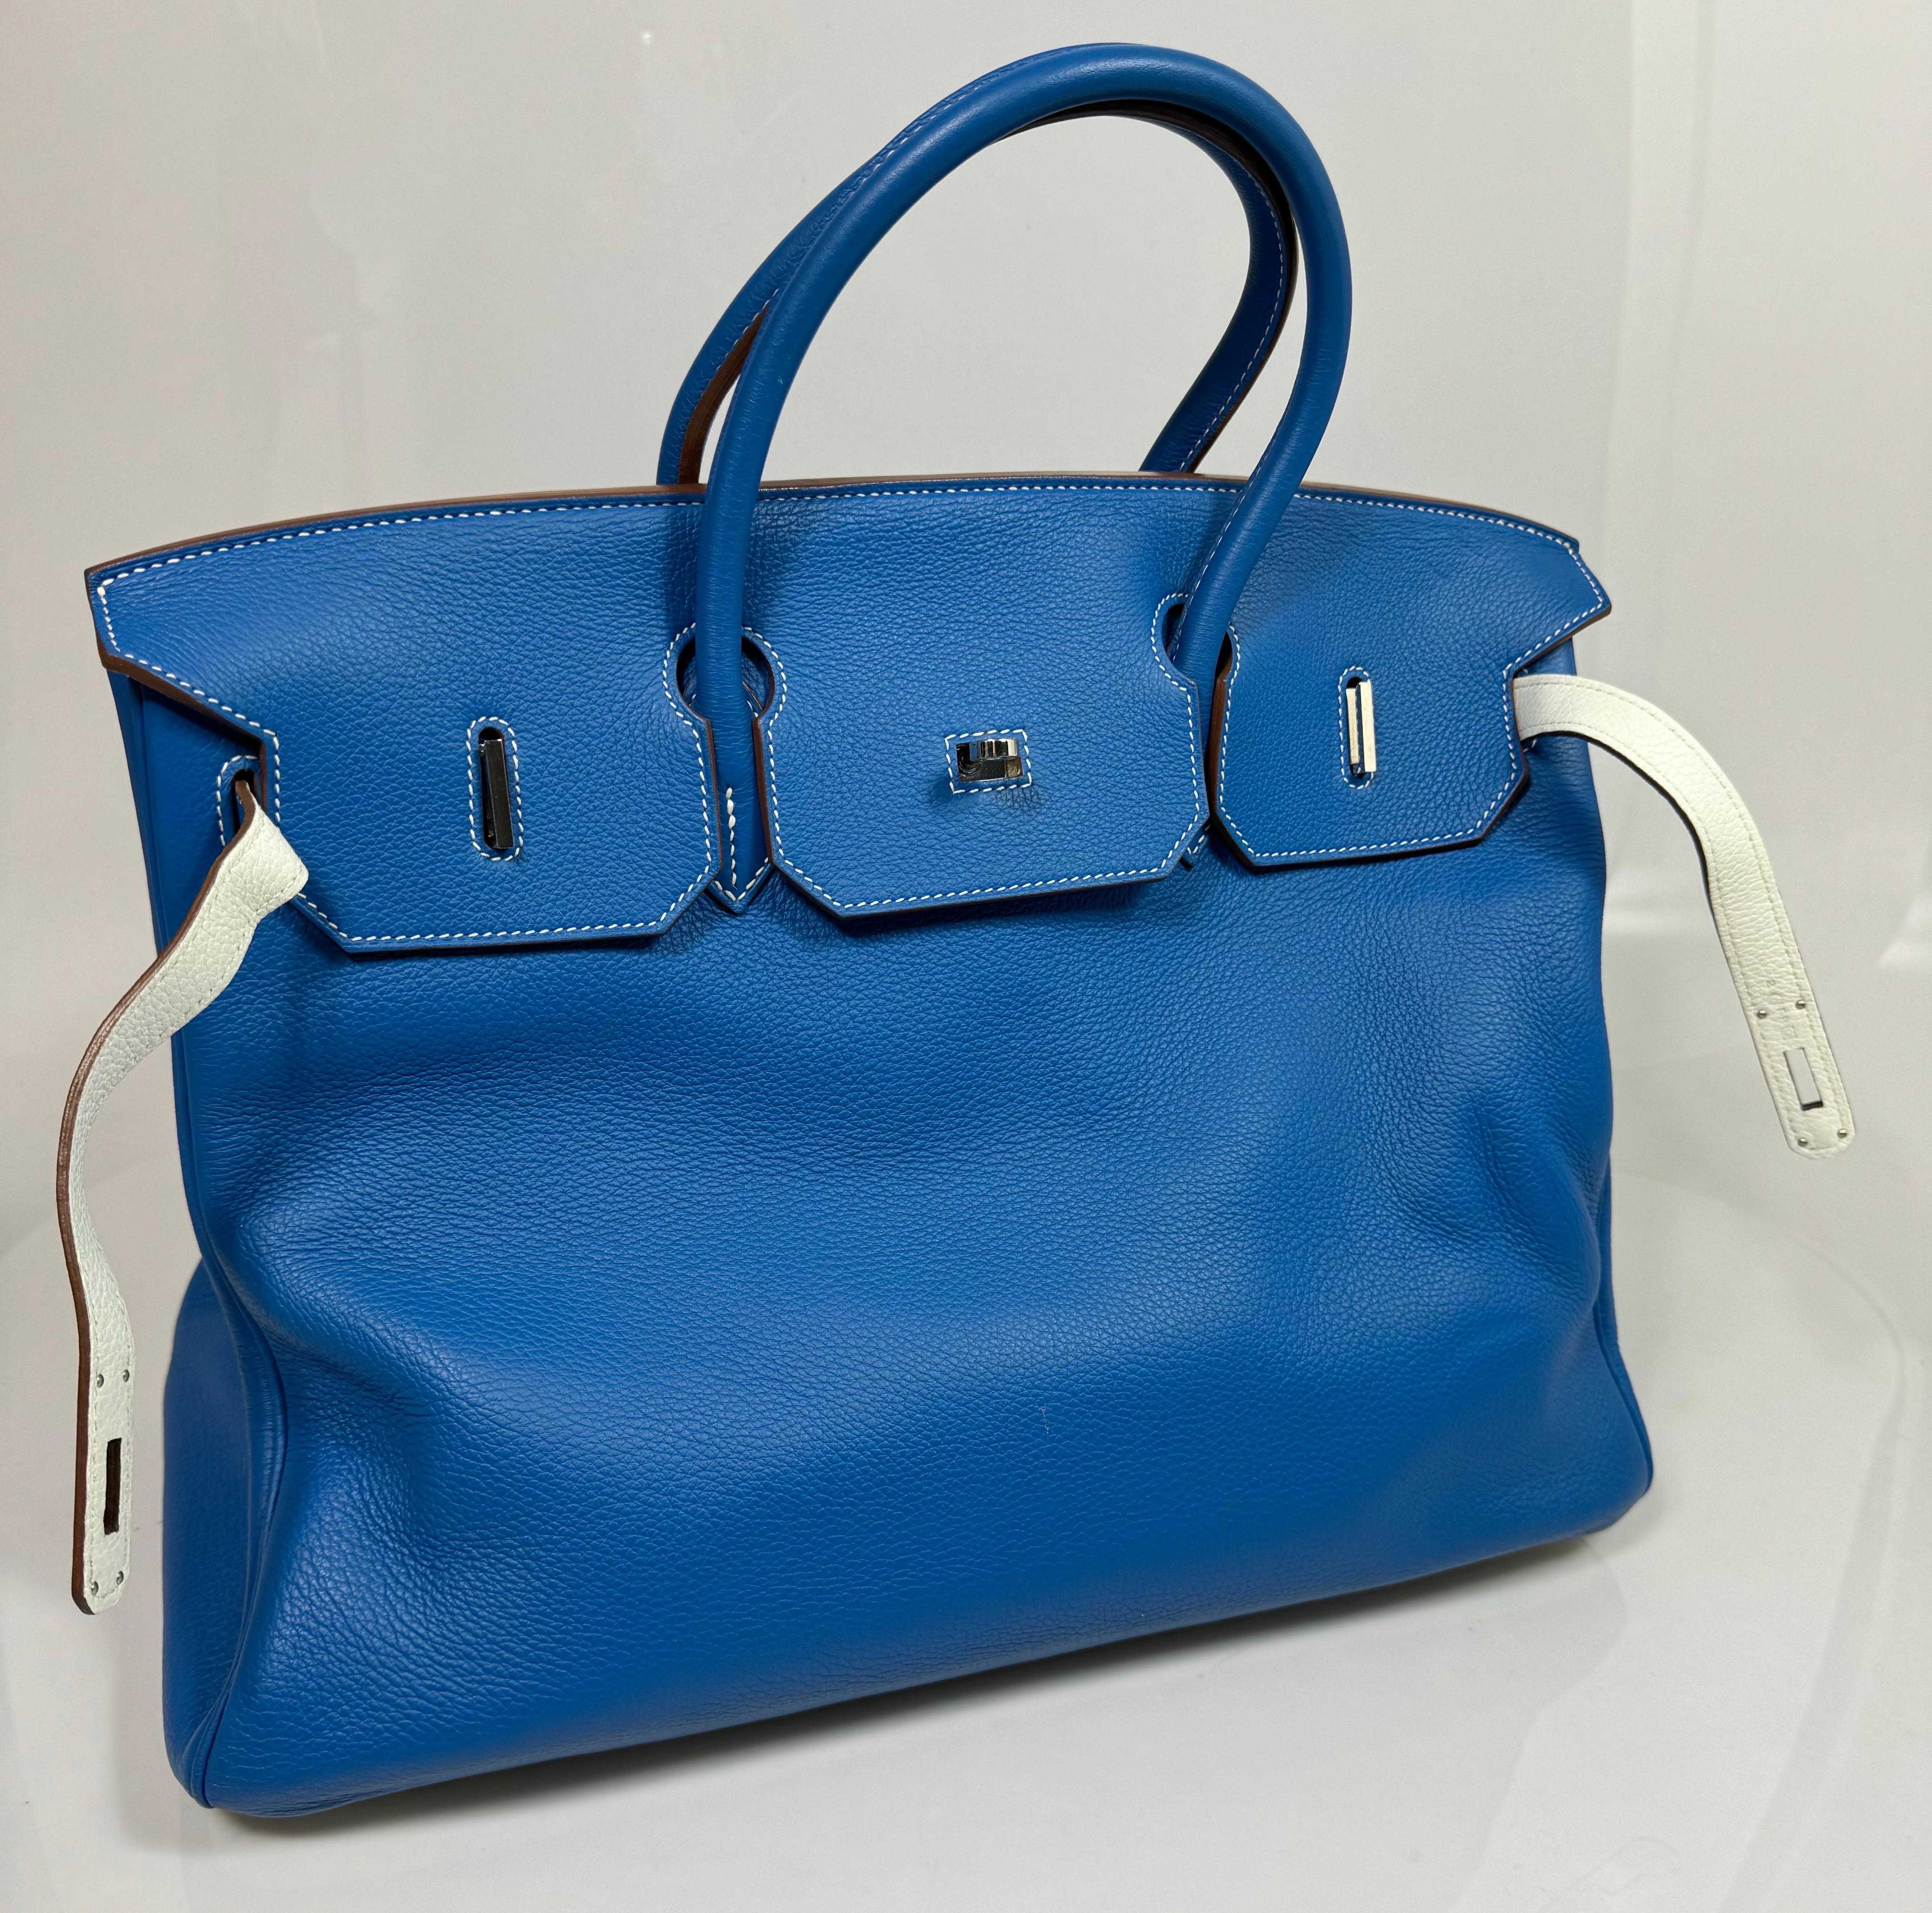 Hermes 40cm  Mykonos Blue and White Clemence Limited edition Birkin-SHW -2011 For Sale 4